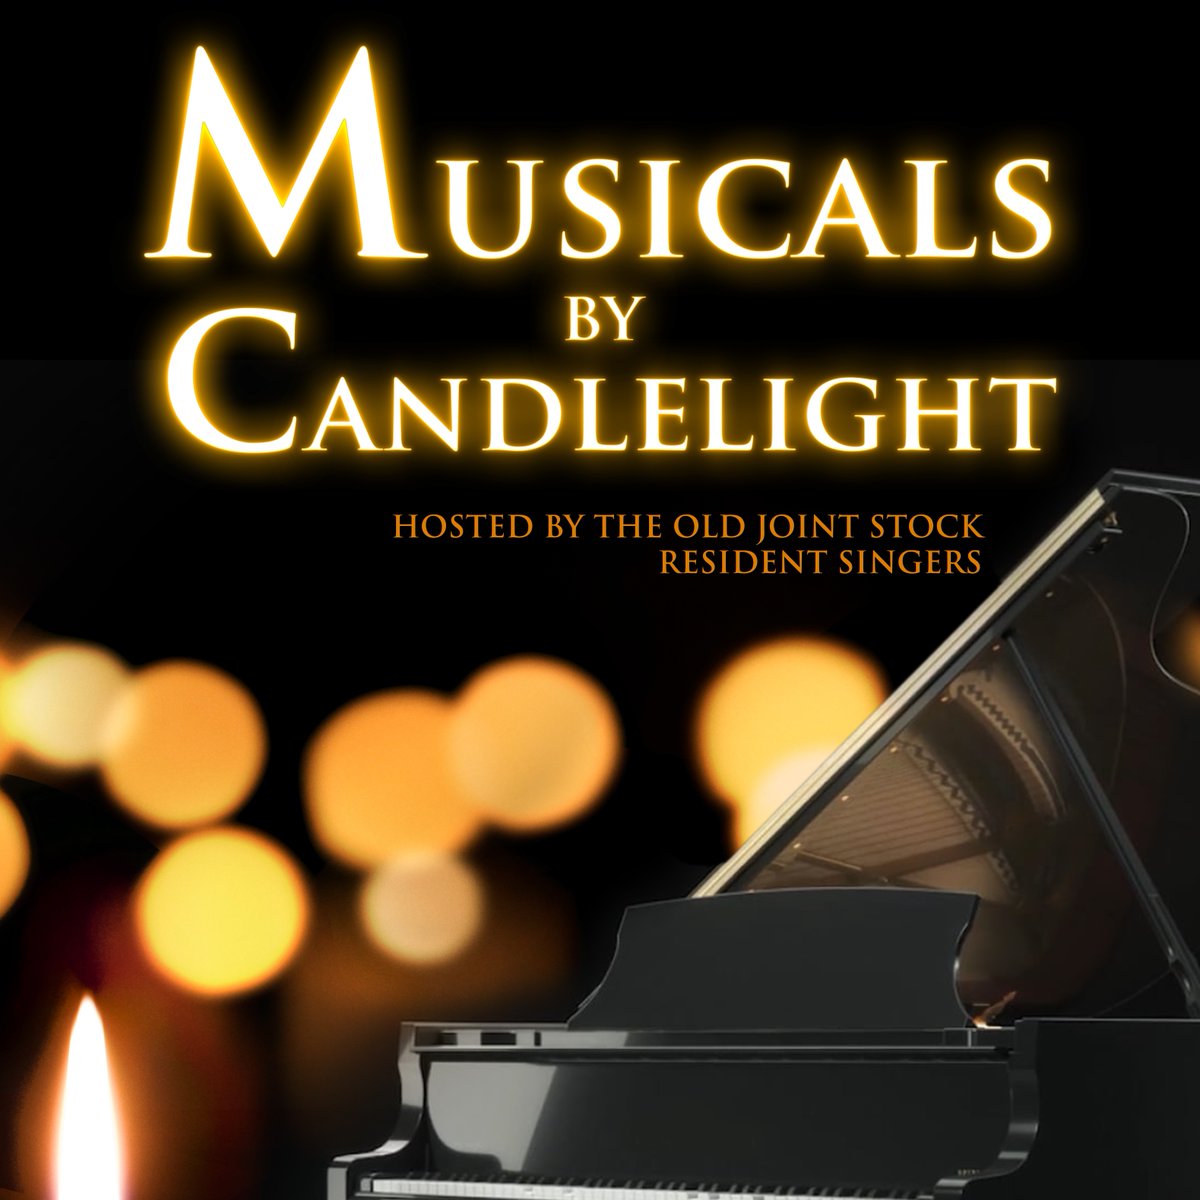 WINE, CANDLELIGHT AND THE MUSICAL CLASSIC, HOW ELSE SPEND YOUR WEEKEND? 🕯️ Musicals by Candlelight - The Classics 📅 8th June (Sat Evening), 9th June (Sun Matinee) Join us for a night of carefully selected Musical Theatre classics basked in the elegant glow of candlelight!